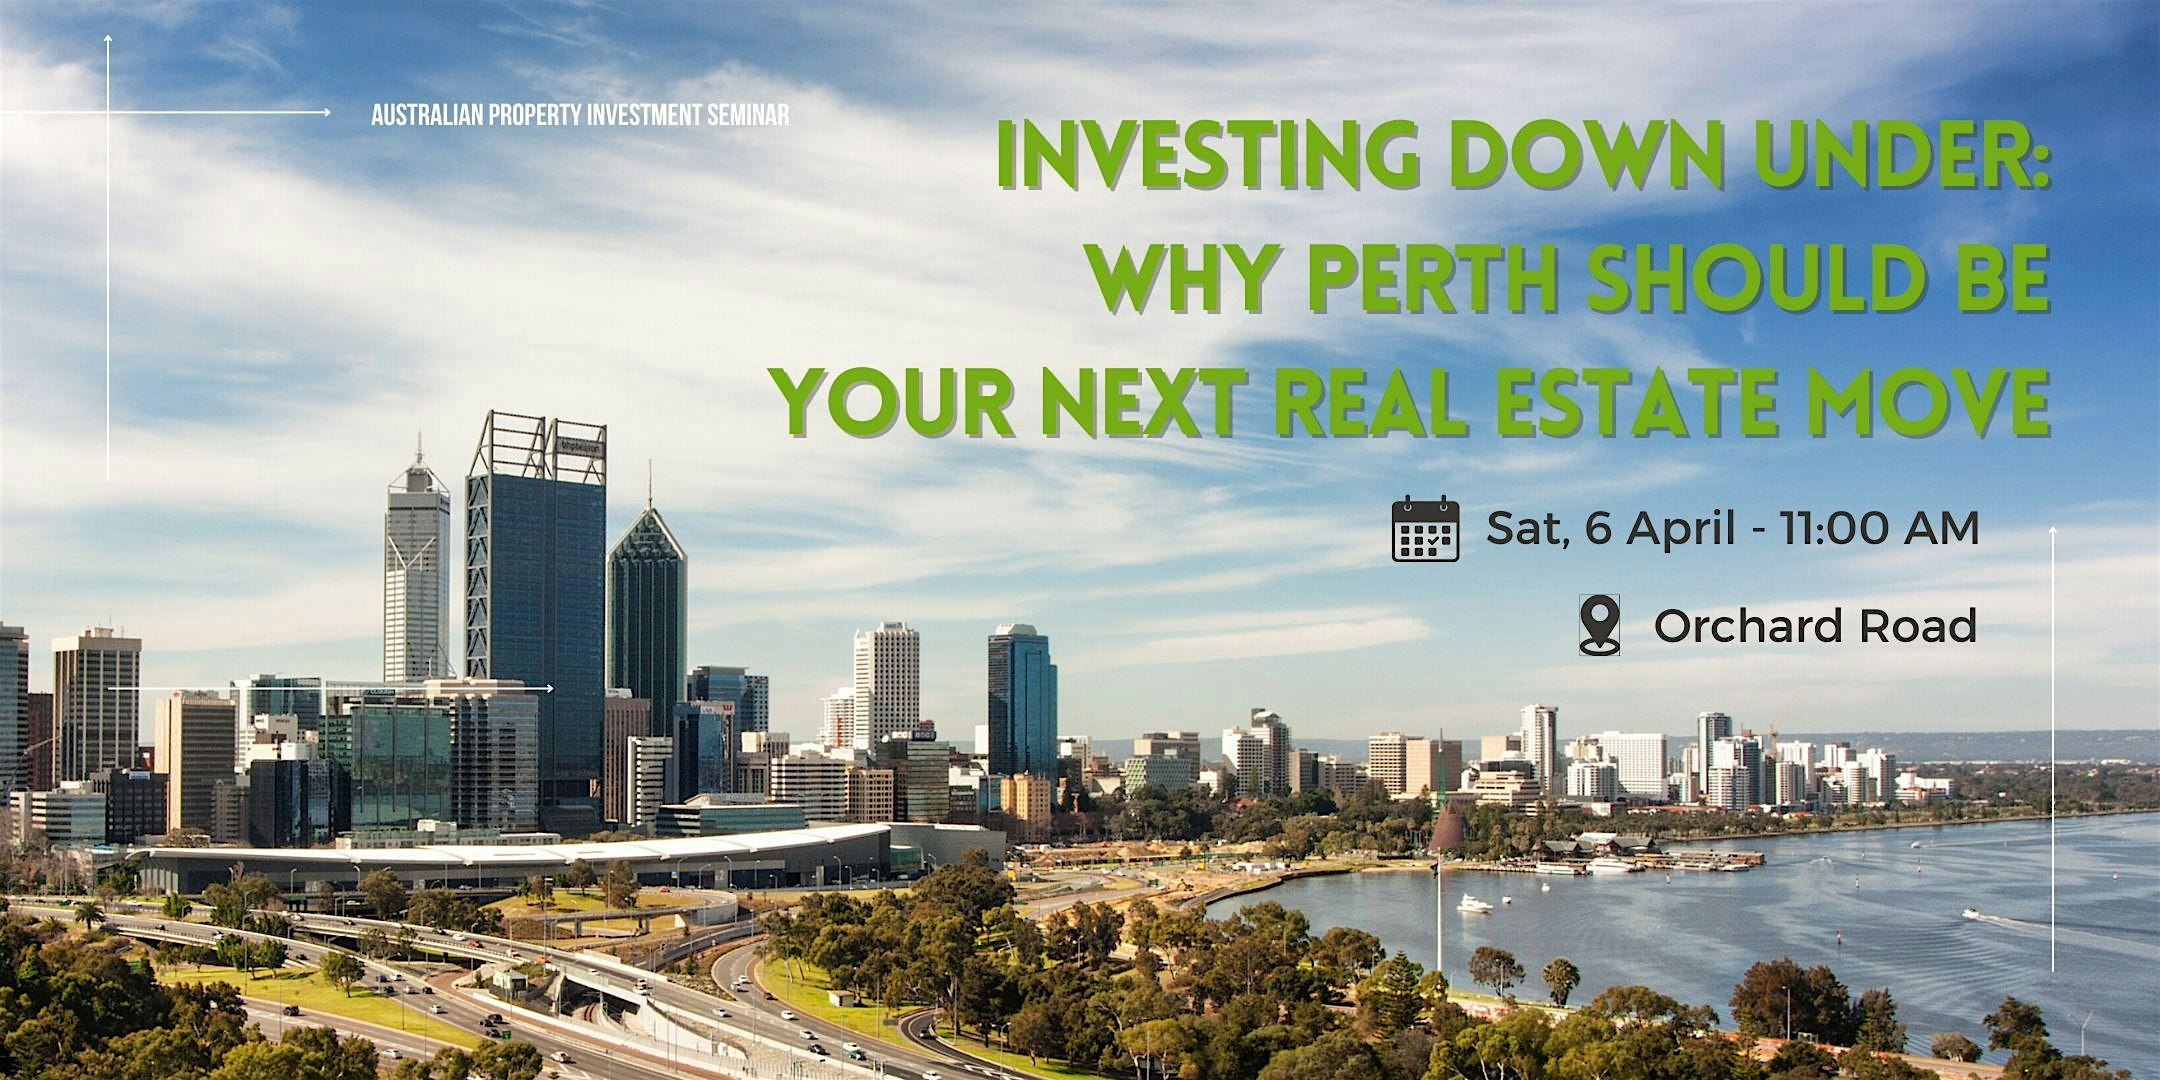 FREE Seminar:  Why Perth Should Be Your Next Real Estate Move